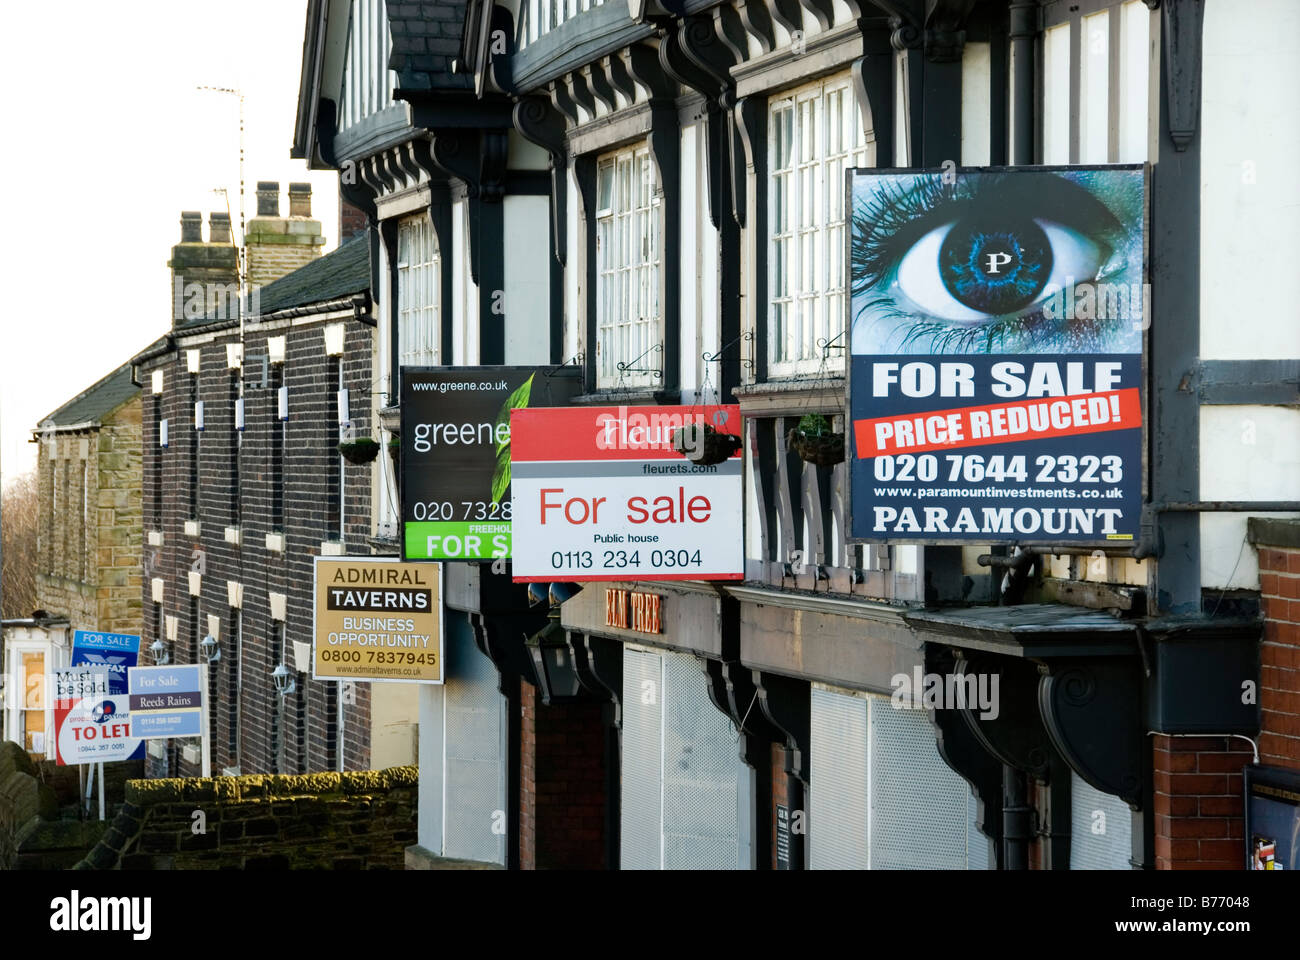 For Sale Signs with Price Reduced on Pub Premises and Houses, Selling Slump in Property Market January 2009, Sheffield, England Stock Photo